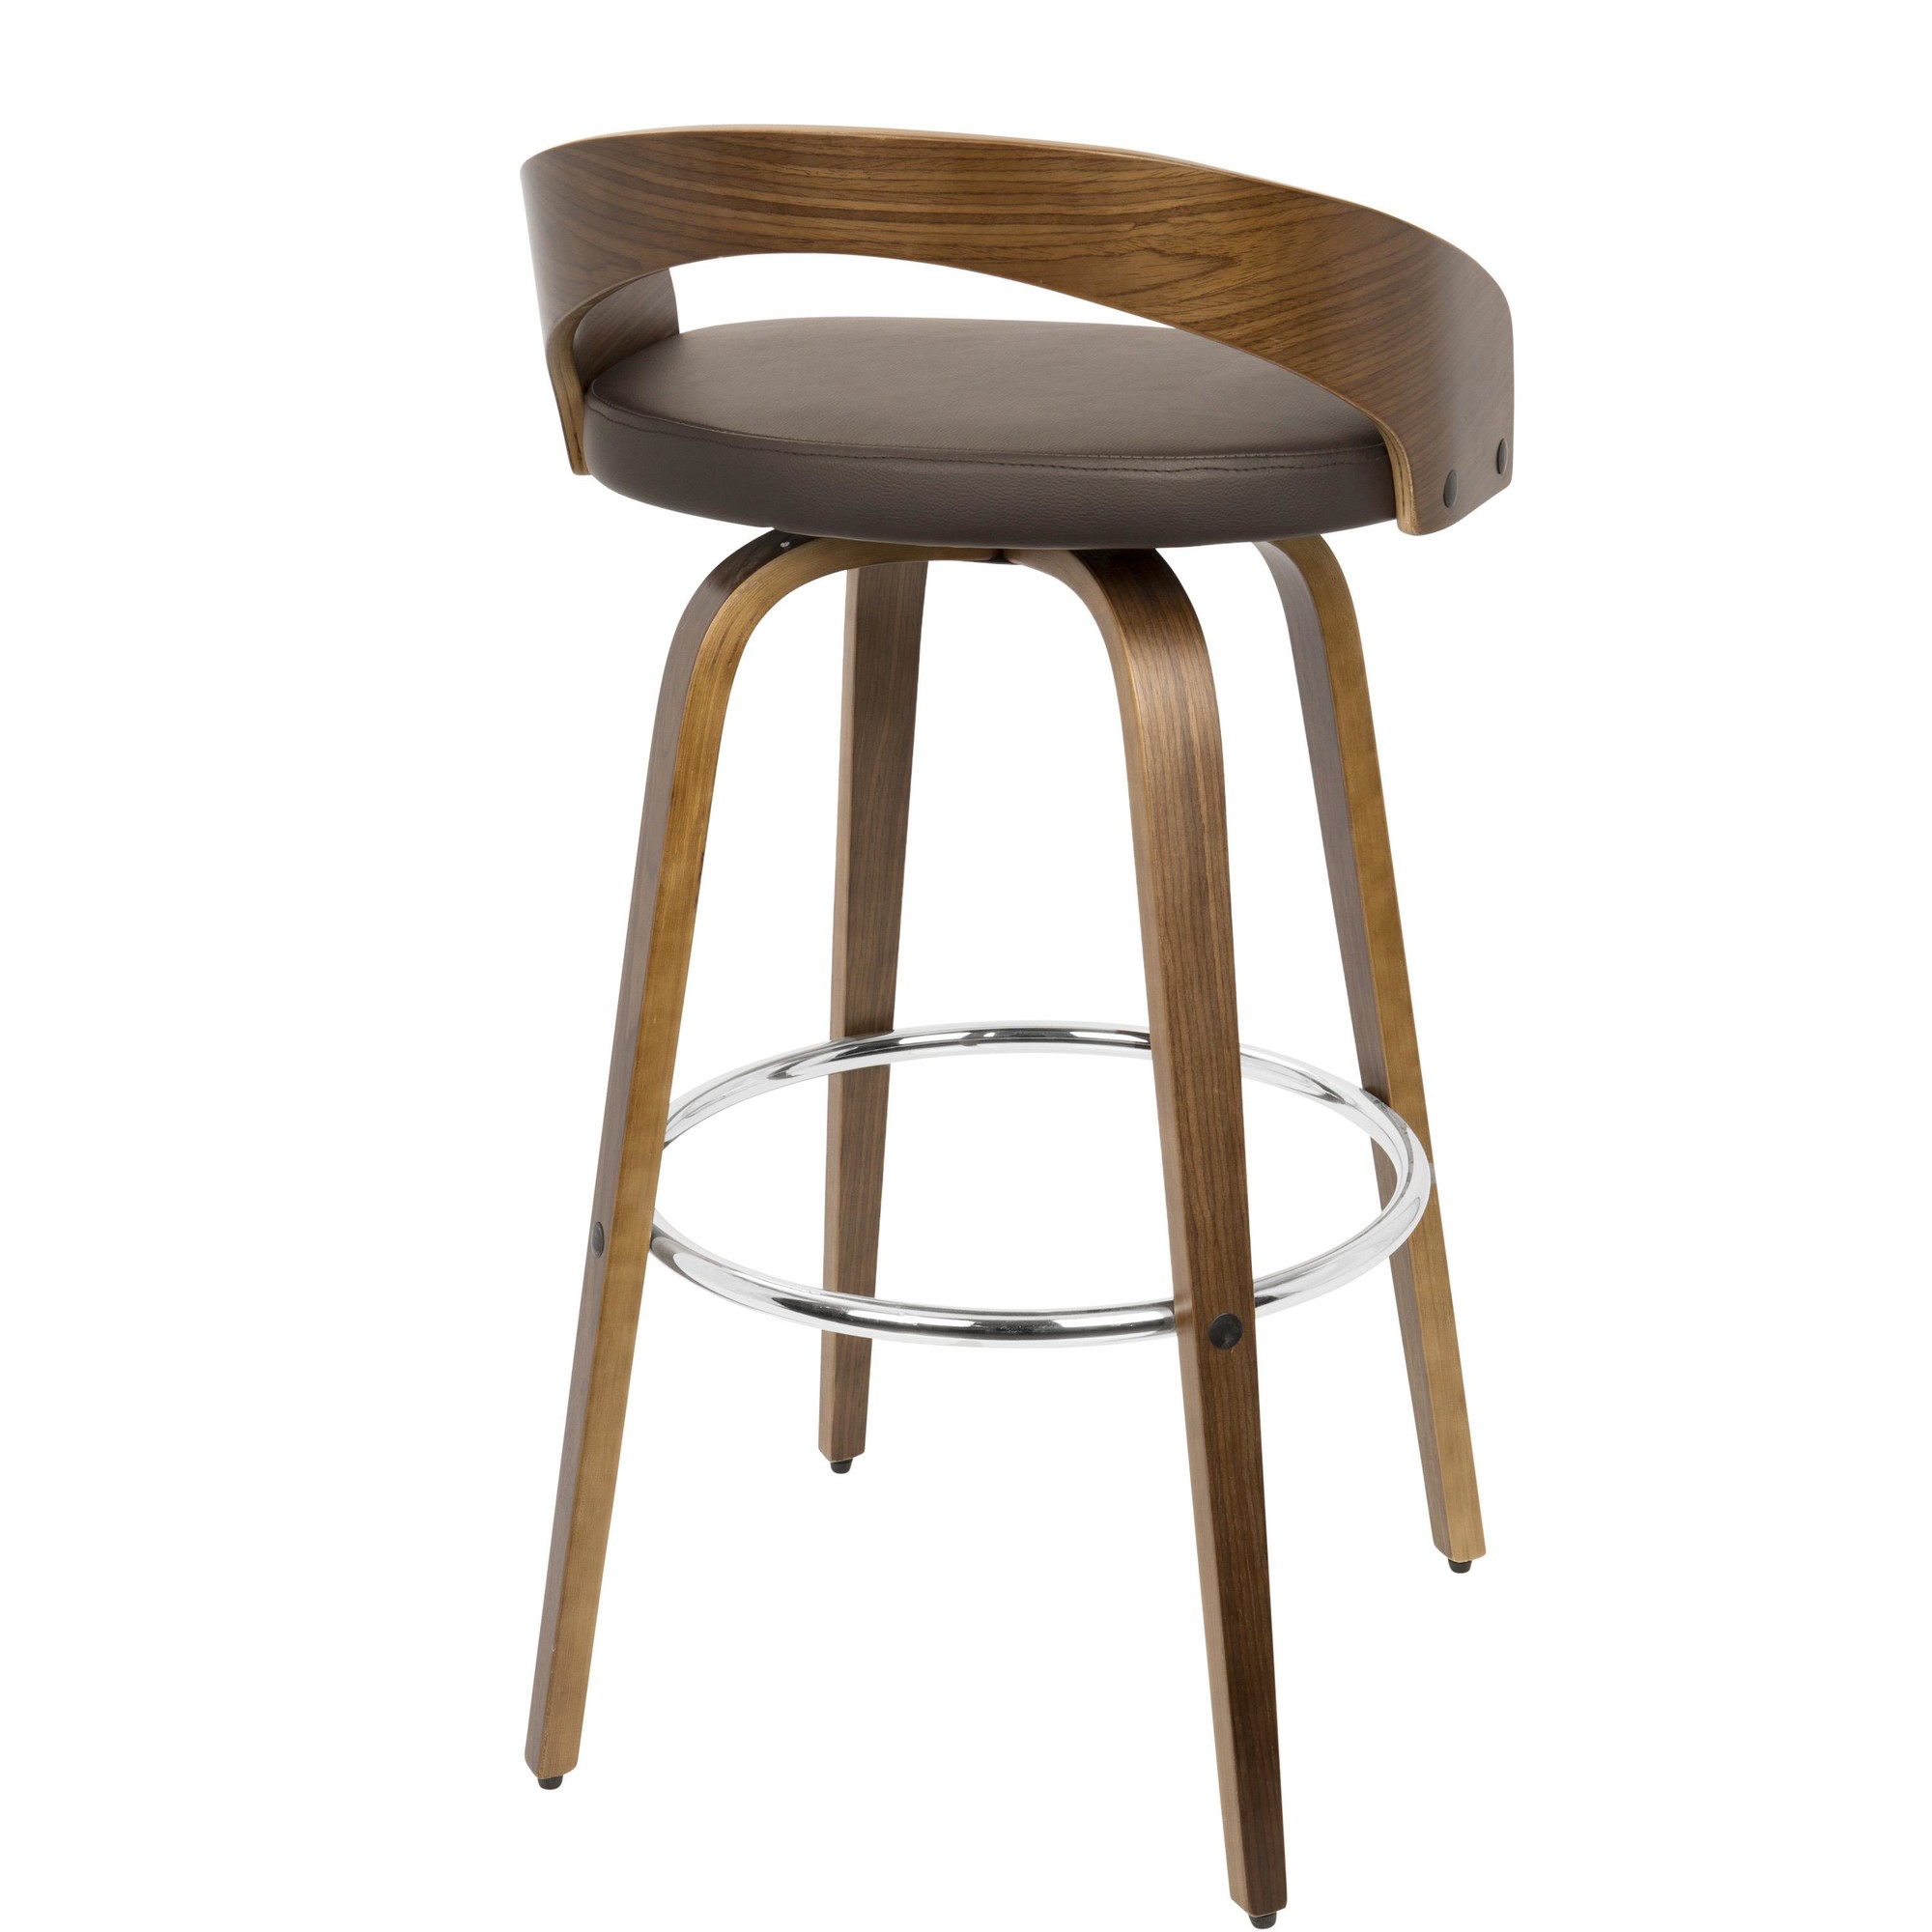 Lumi Grotto Mcm Barstool With Swivel In, Grotto Bar Stool Walnut And Brown